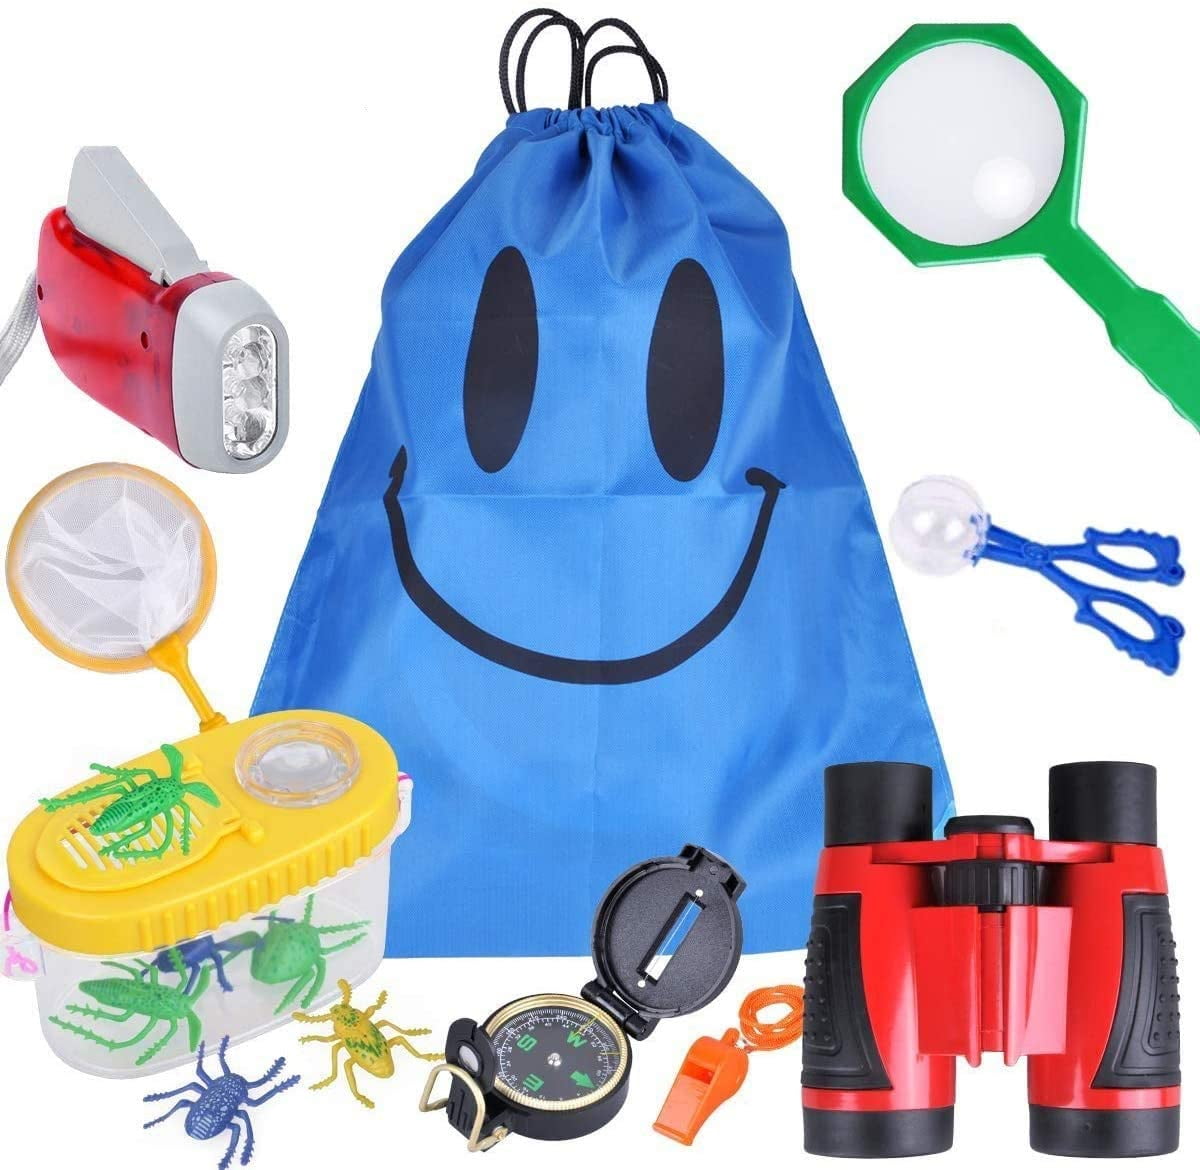 for sale online Kids Outdoor Adventure Exploration Toy Kit for Boys Girls Bug Catching Pack 